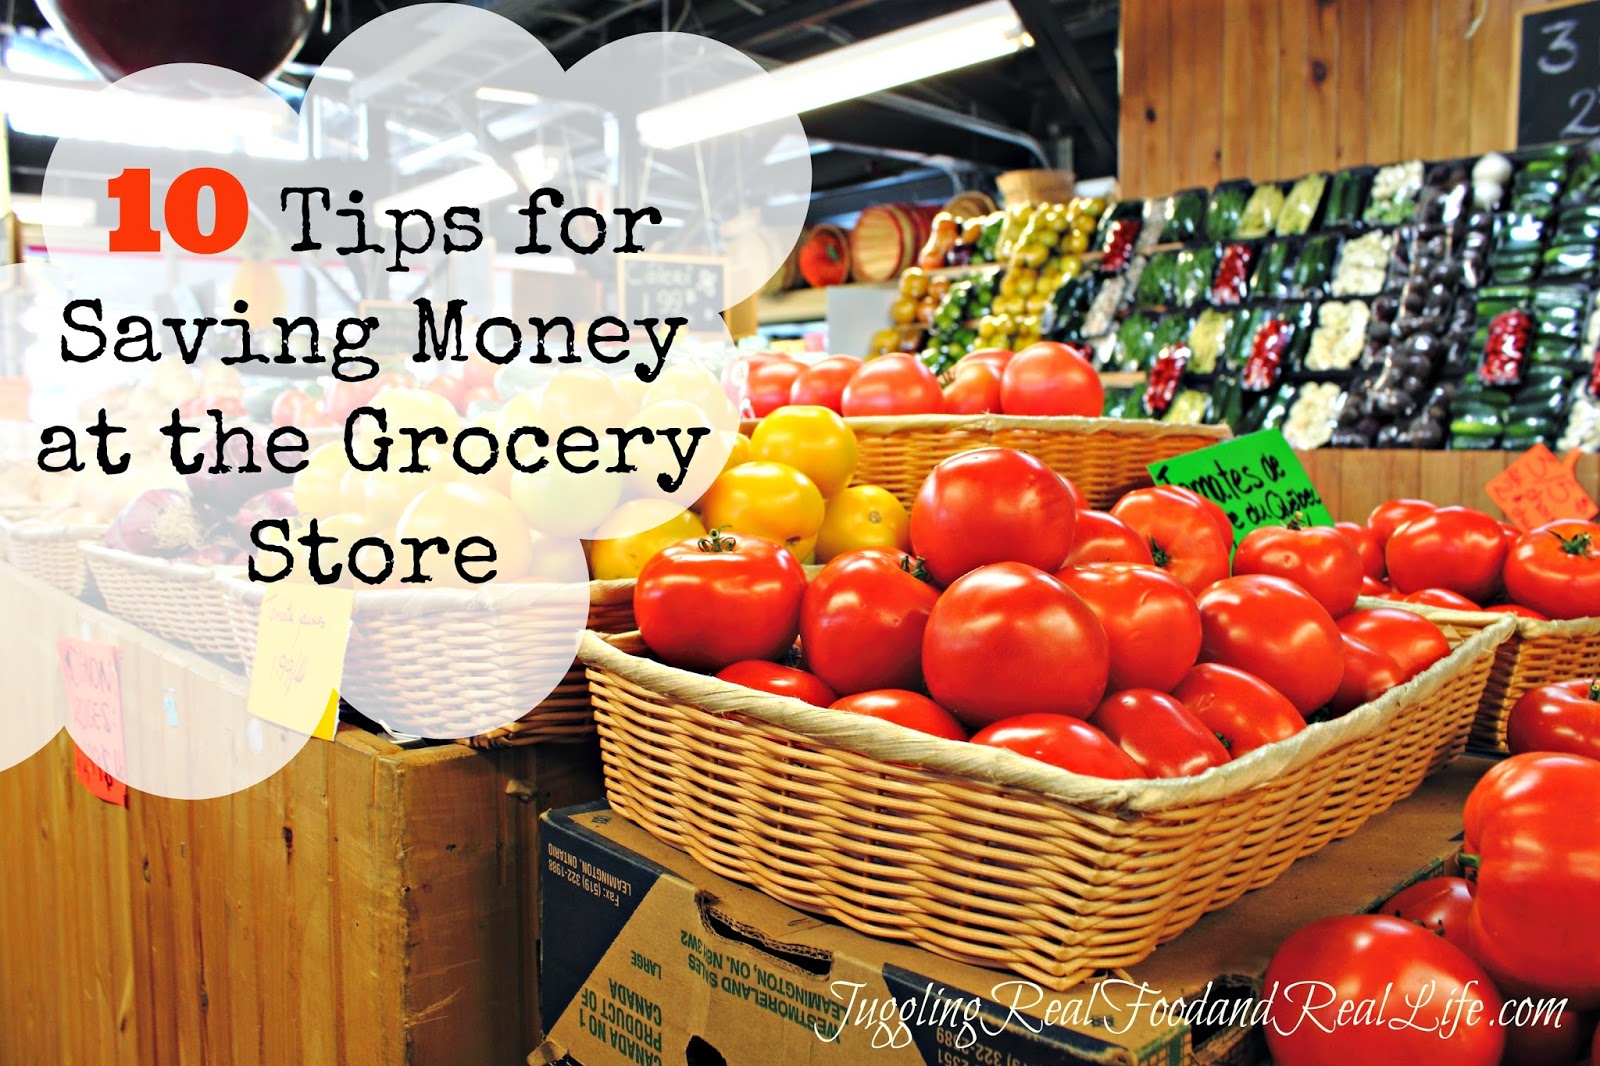 10 Tips for Saving Money at the Grocery Store